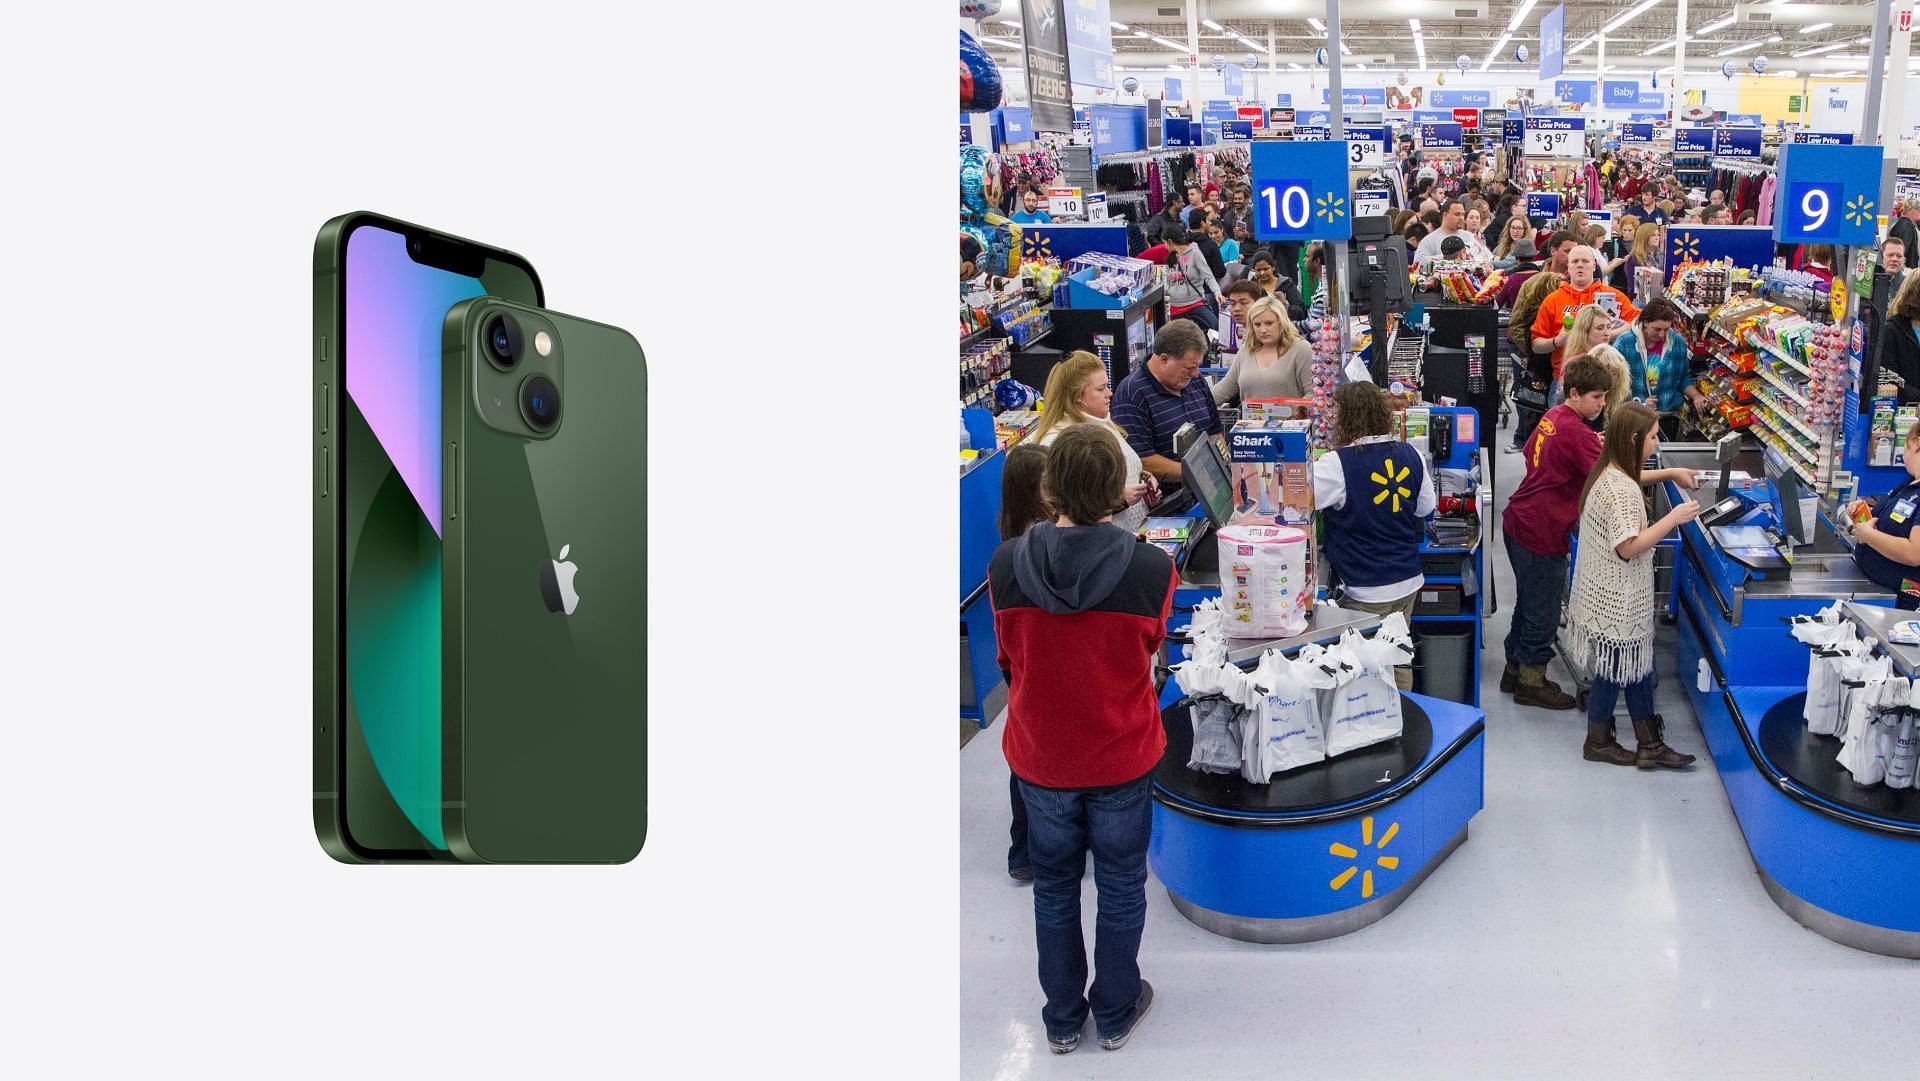 Several Apple products will be on discount when the Walmart sale commences (Images via Apple, Fortune)